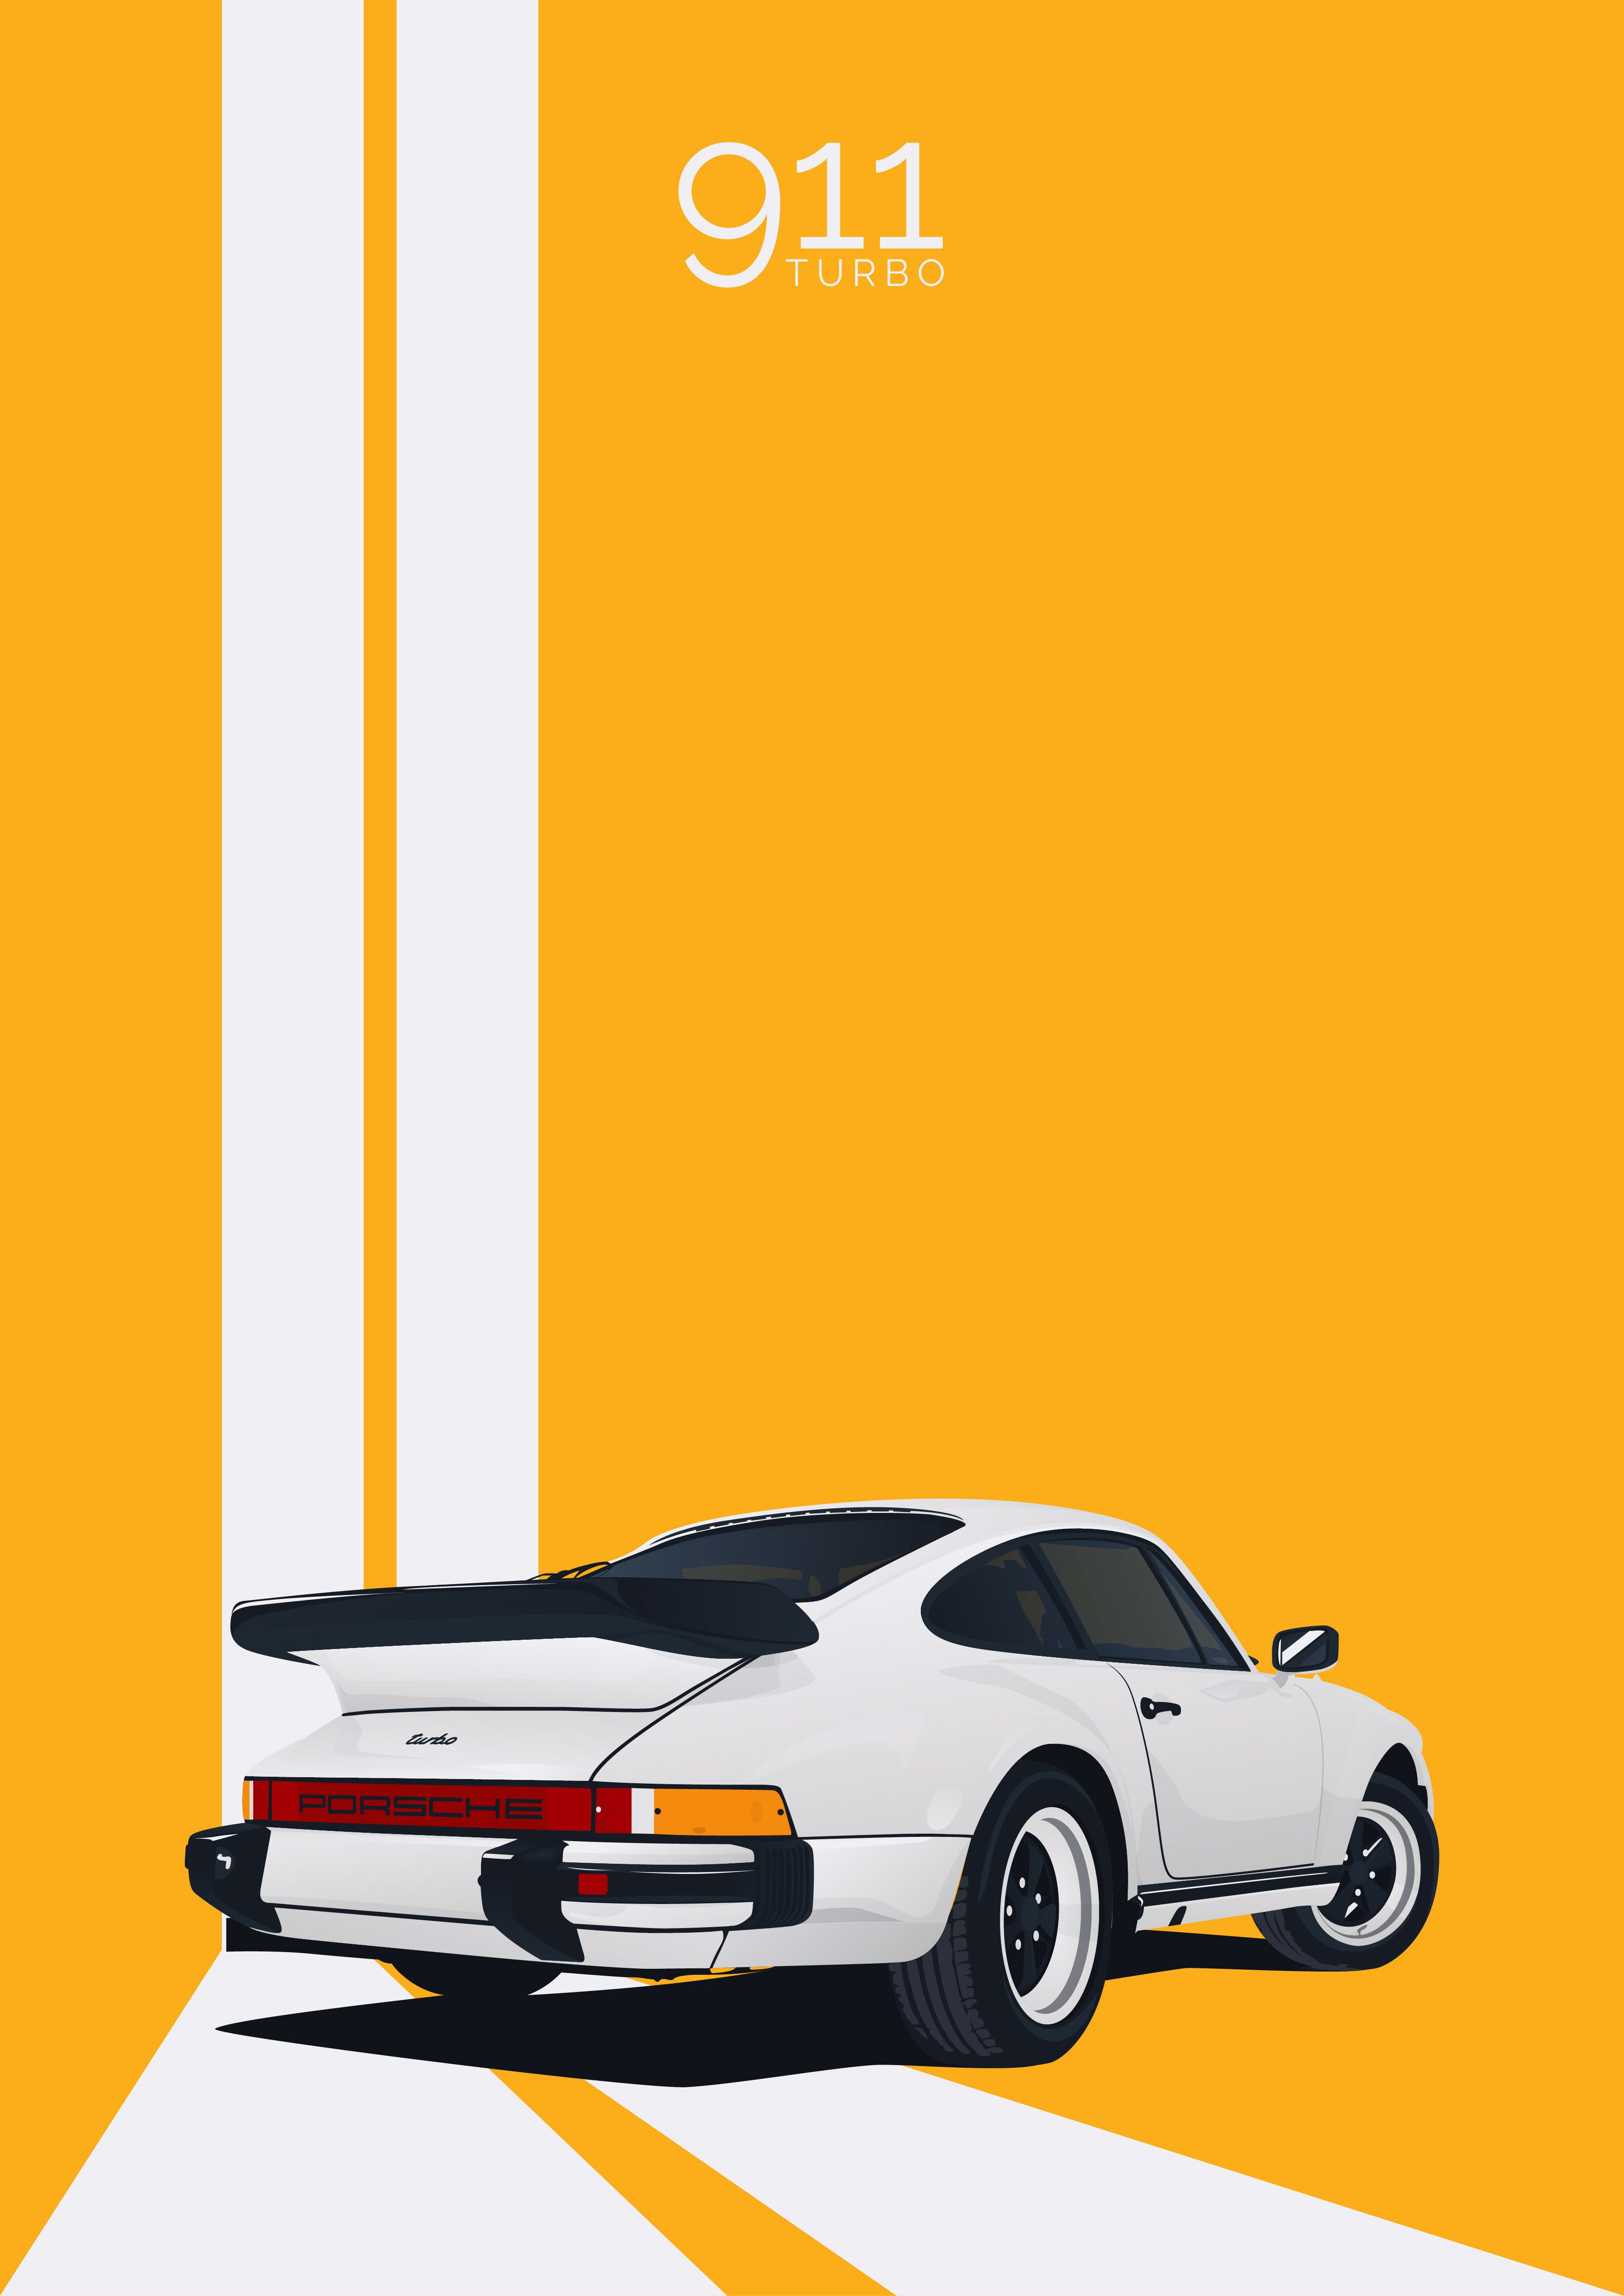 Negative space in this ad helps to draw attention to the porsche in the bottom. The vertical lines, which seem. Car advertising design, Art cars, Car illustration